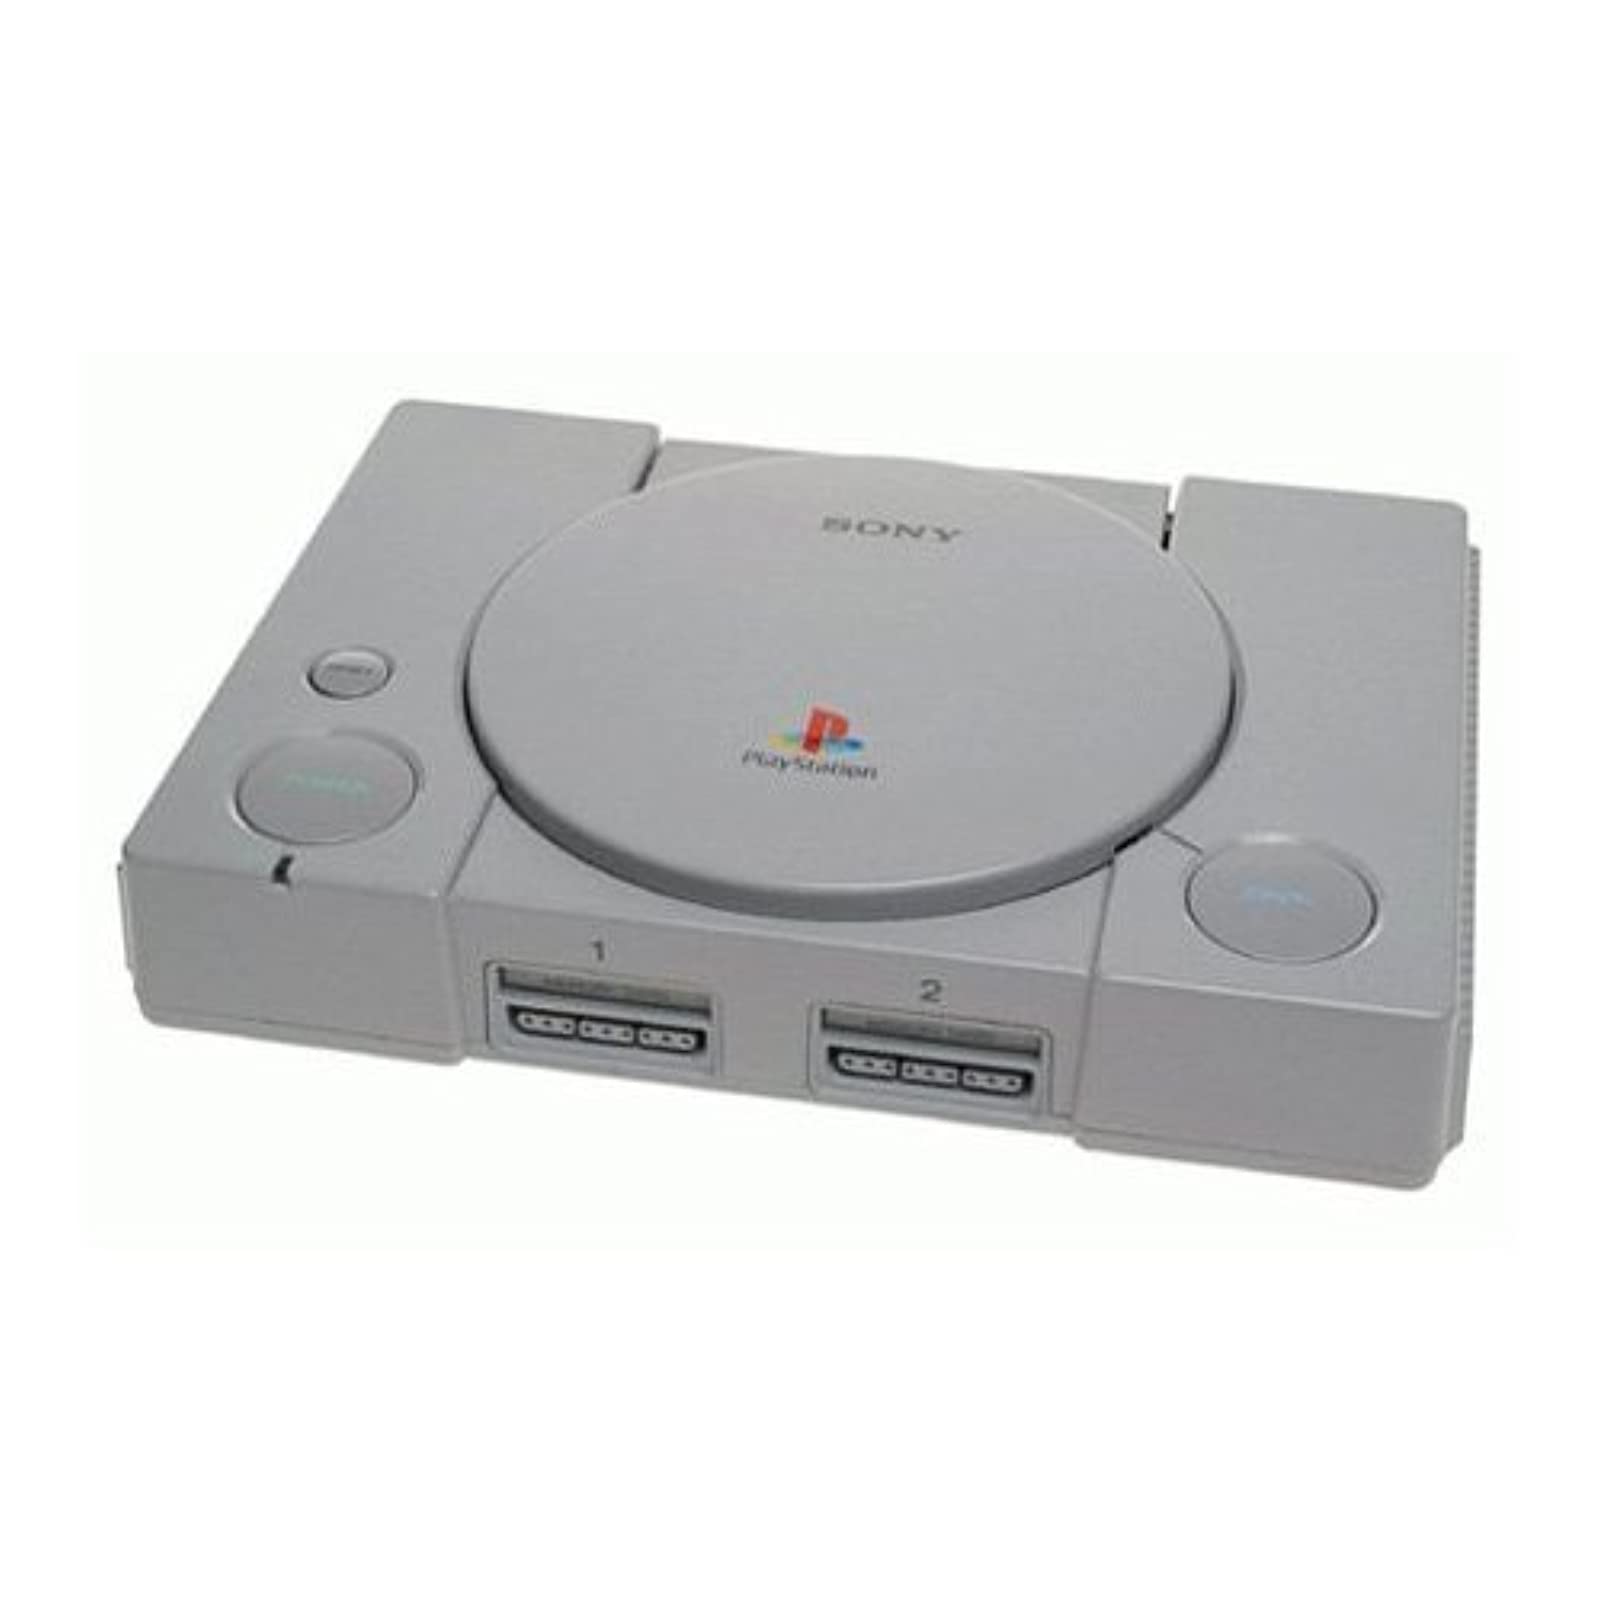 Refurbished PlayStation Consoles in Refurbished Video Game Consoles 